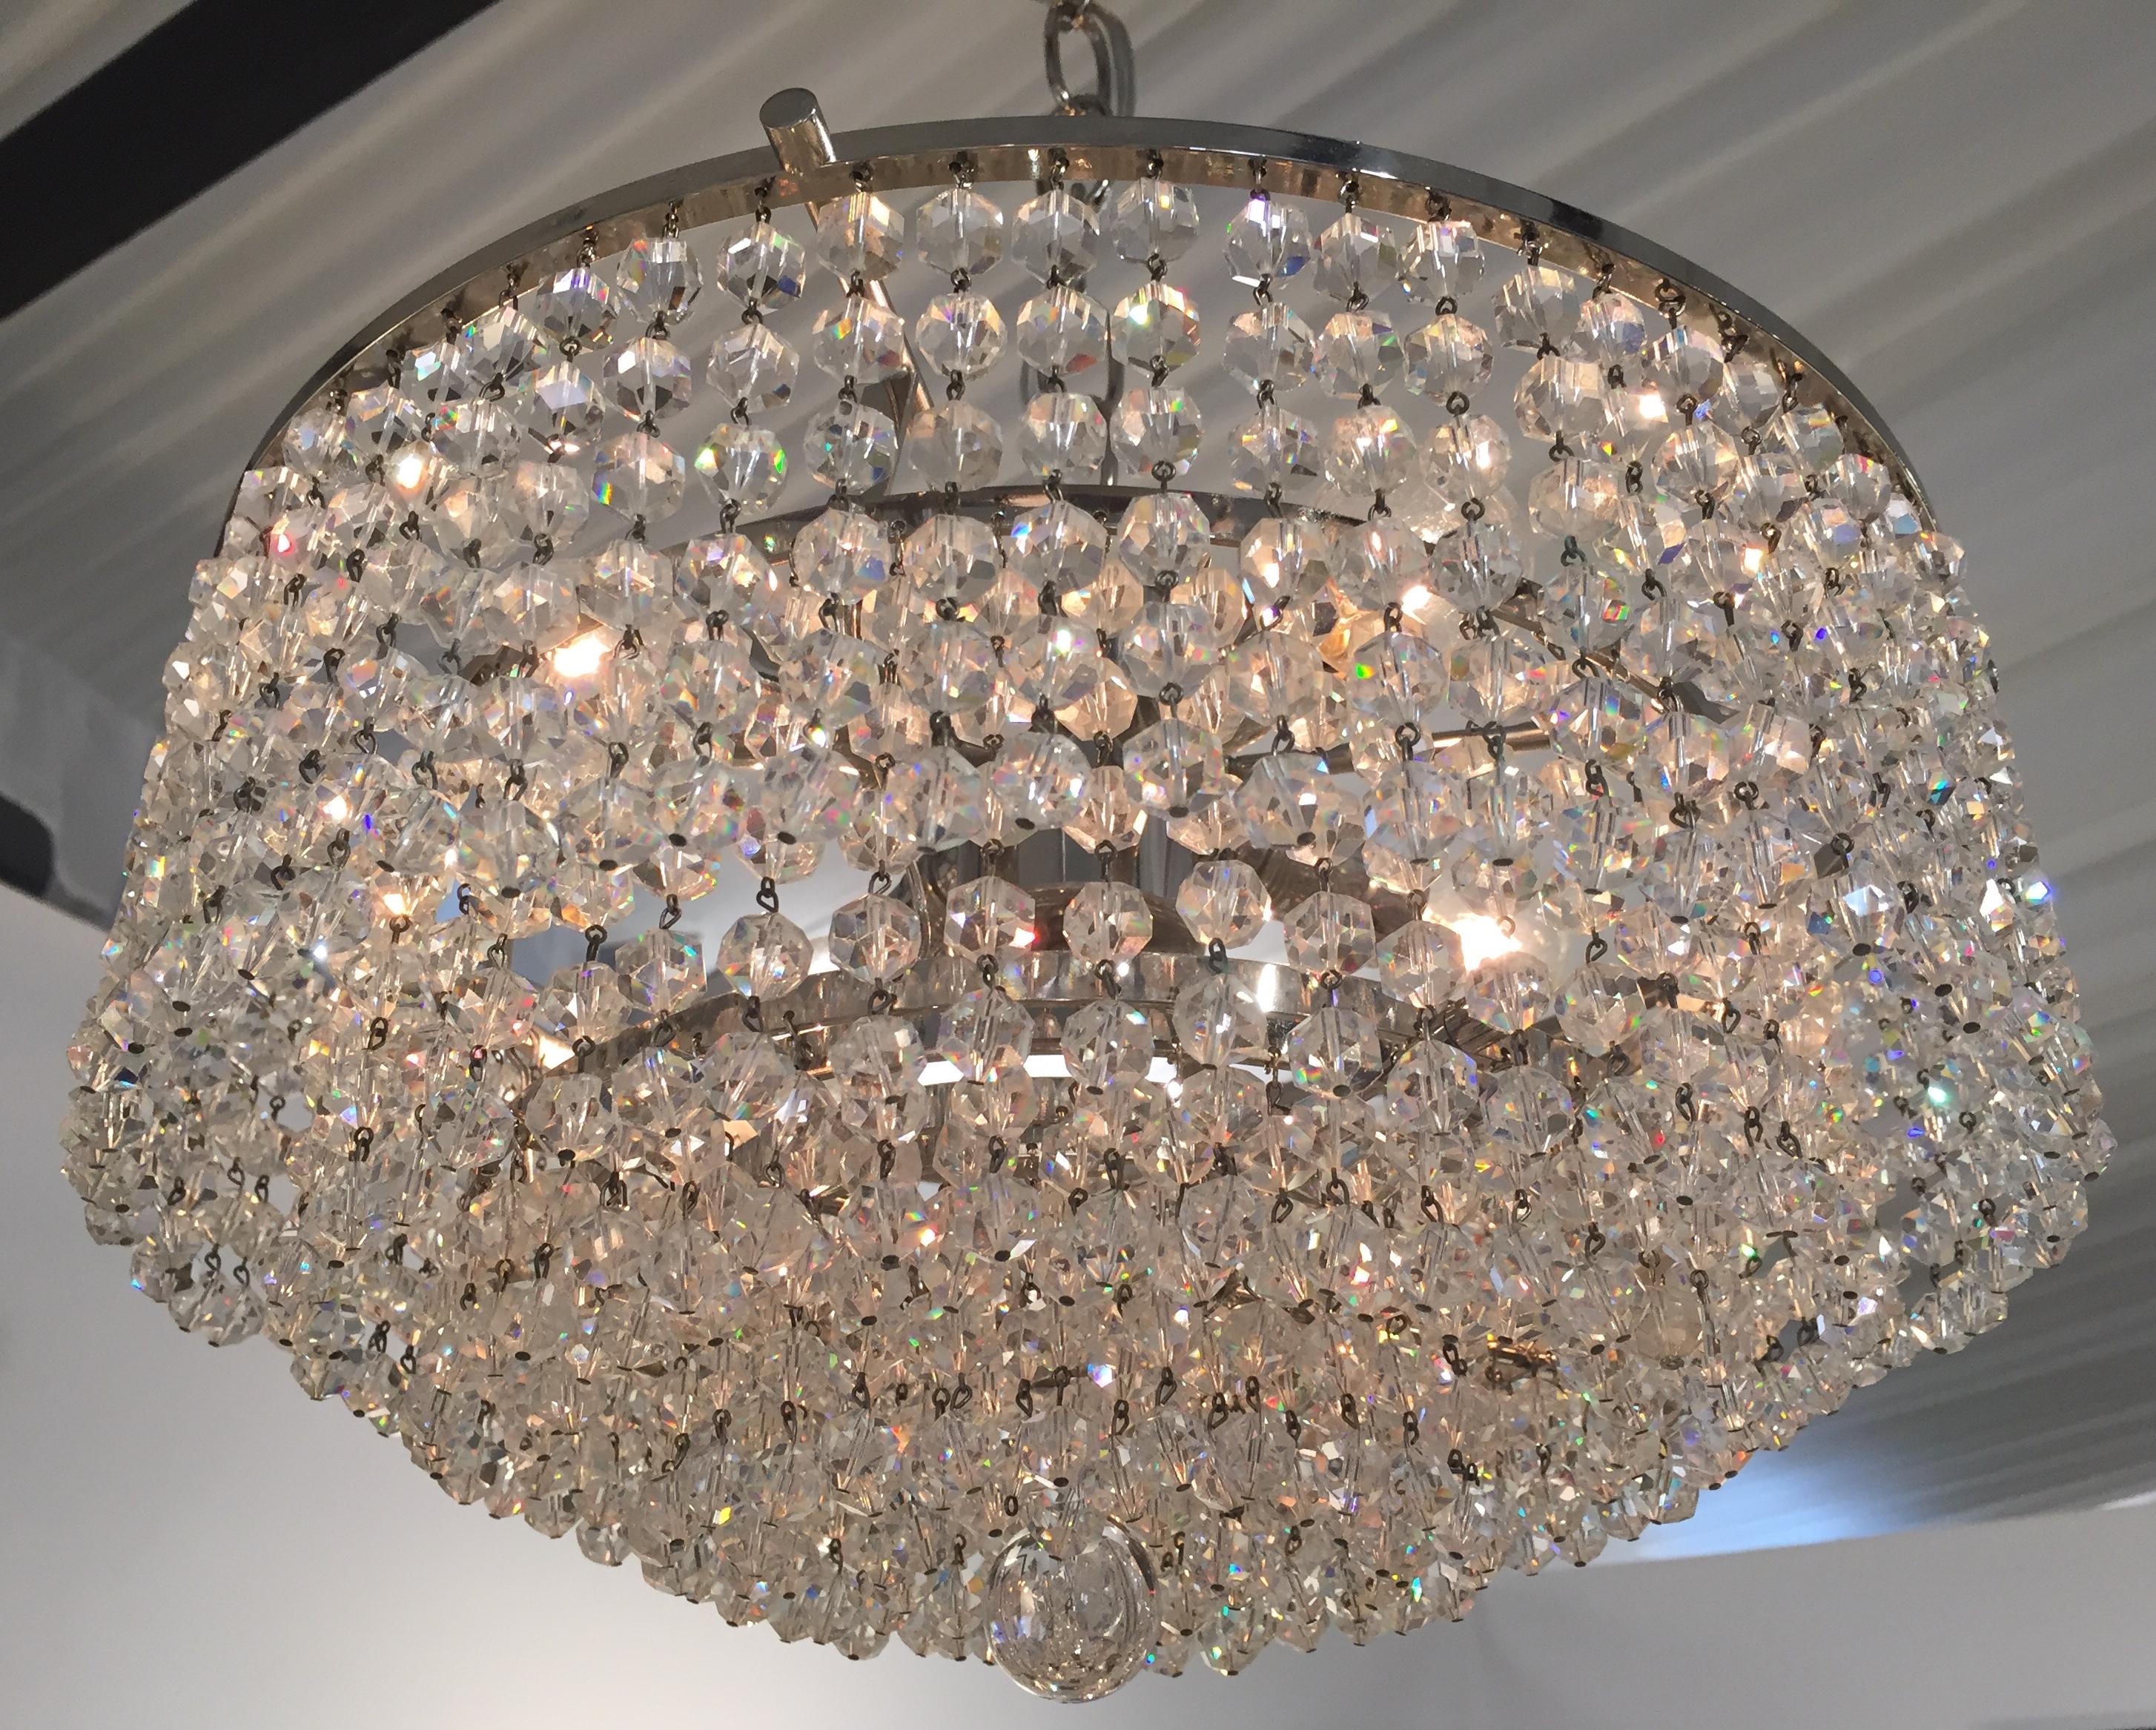 Petite Austrian crystal Strauss chandelier, waterfall design, with nickel finish, and original cap, can be flush mounted also.